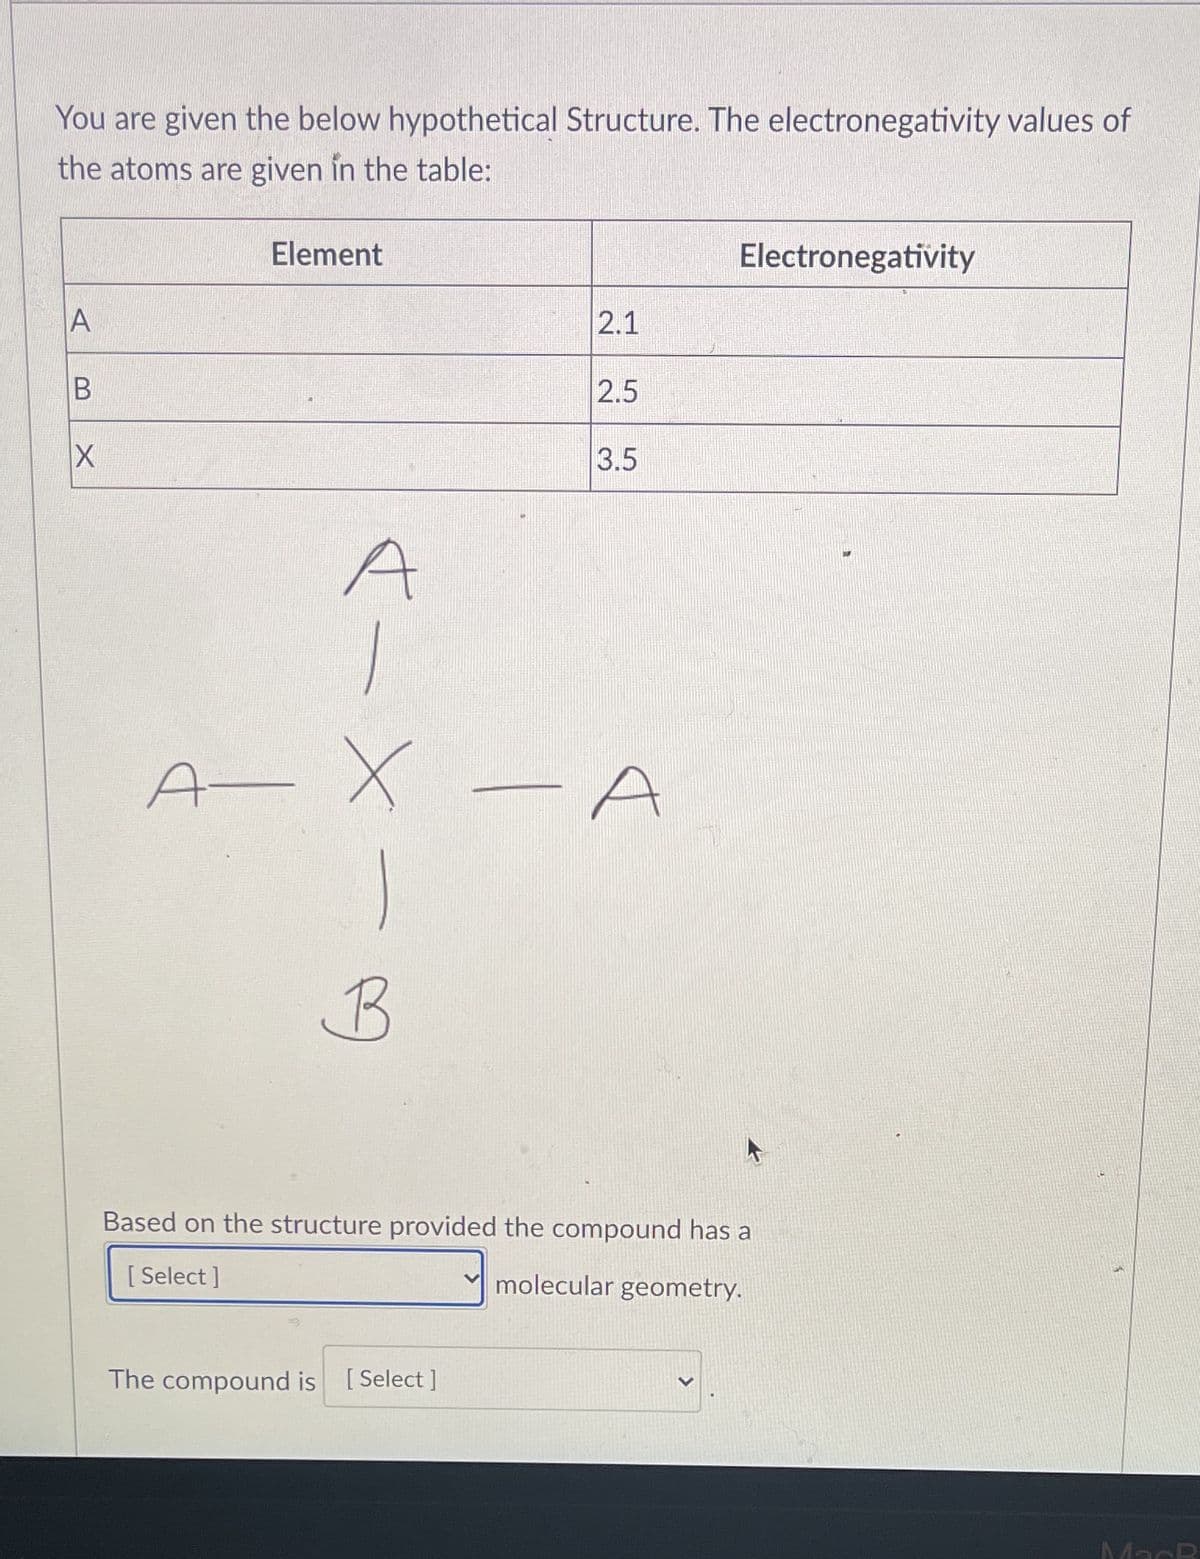 You are given the below hypothetical Structure. The electronegativity values of
the atoms are given in the table:
Element
Electronegativity
A
2.1
2.5
3.5
A
A X
B
Based on the structure provided the compound has a
[ Select ]
molecular geometry.
The compound is [Select ]
MacR
